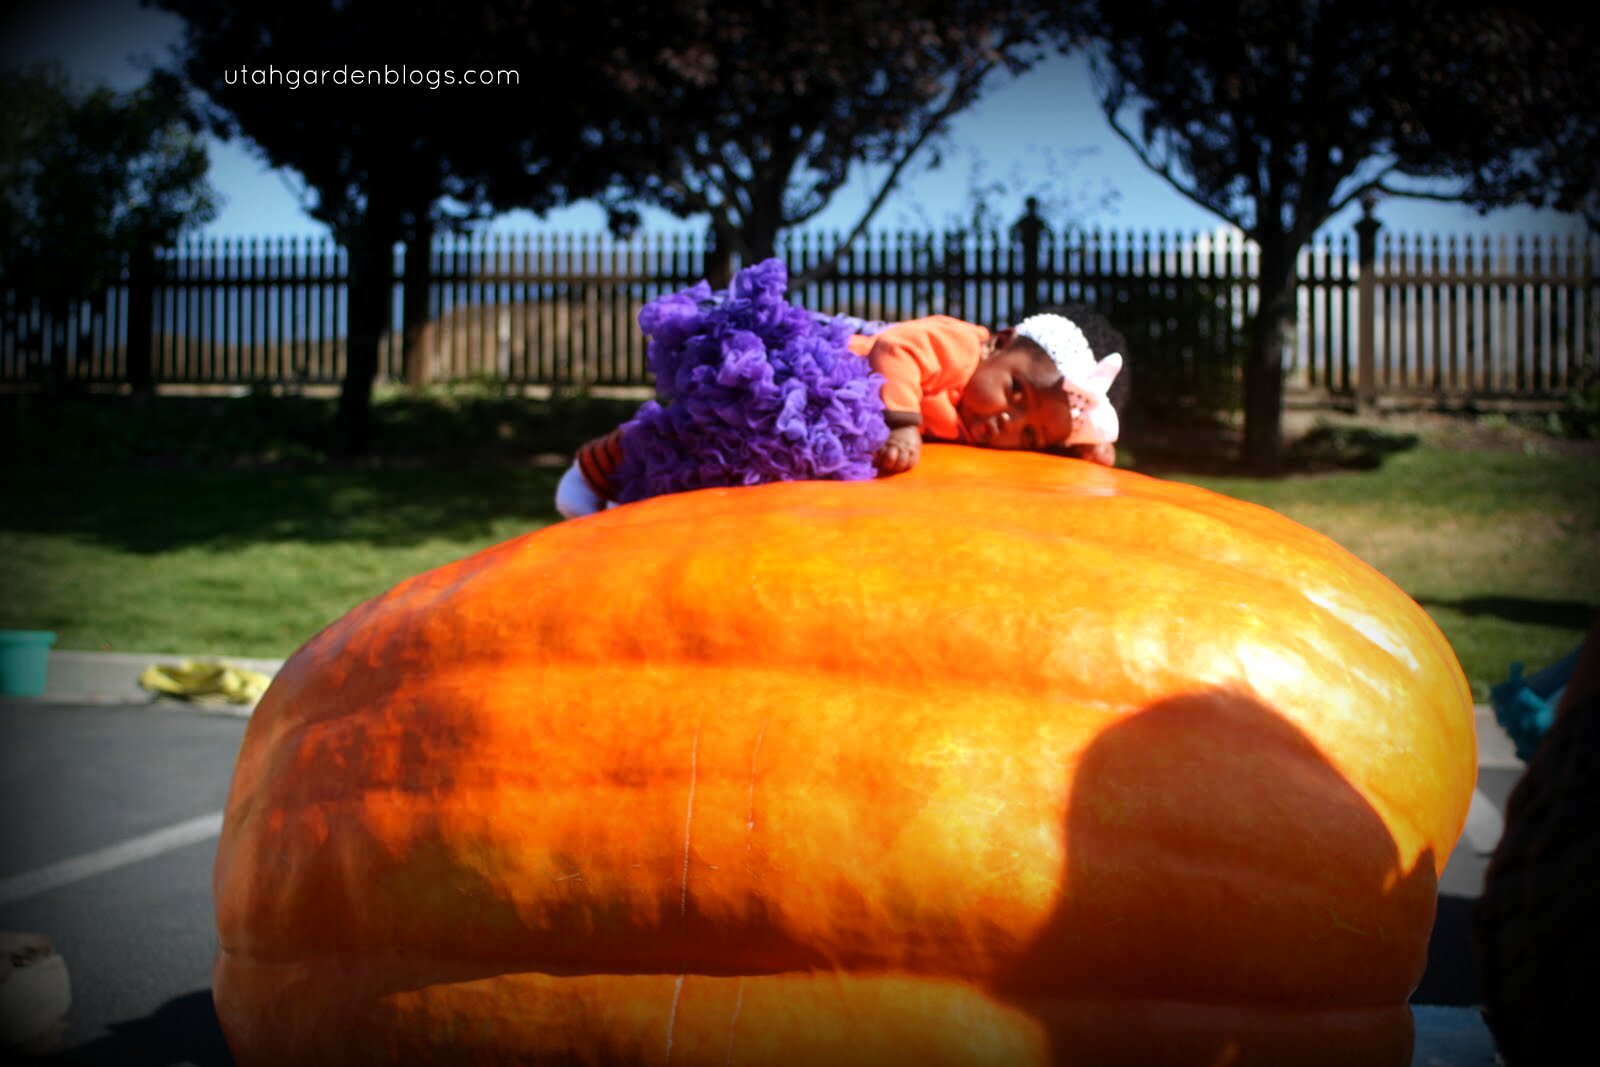 Baby Katie at the 2009 Weigh Off- her Mom is easily hiding behind this 900 lb. pumpkin, holding her in place (nobody worry!)